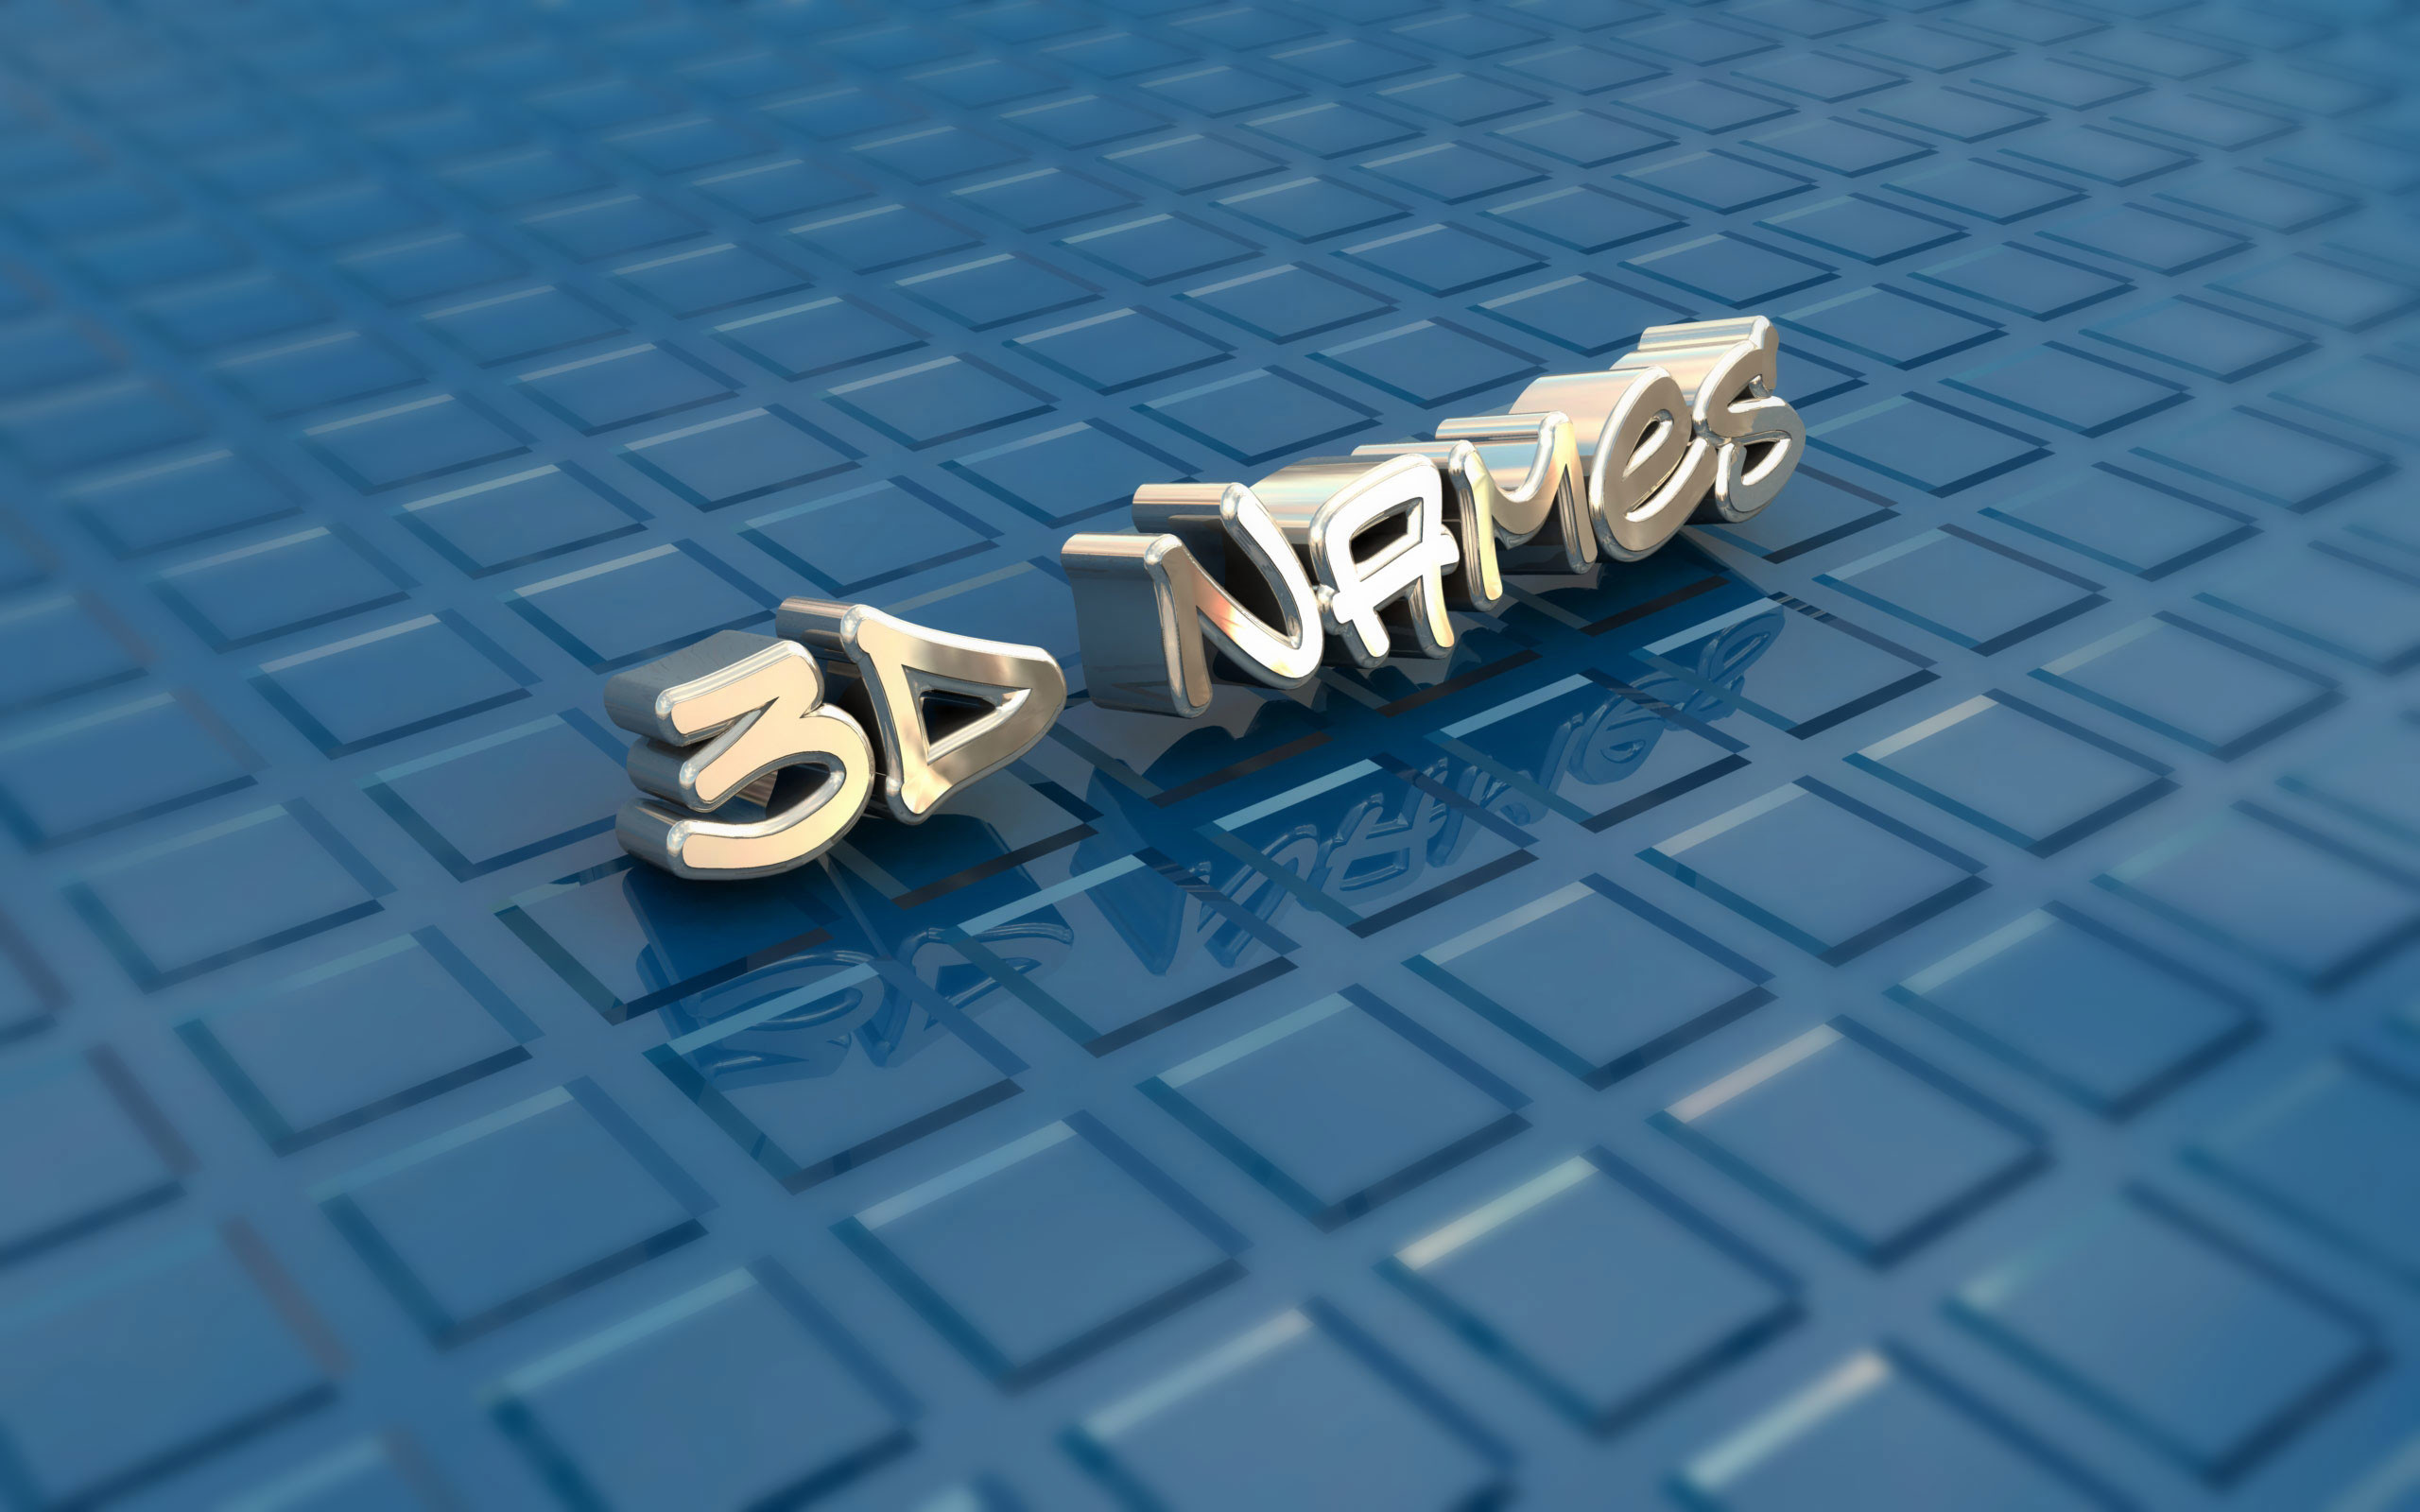 3D Names Wallpapers (66+ pictures)